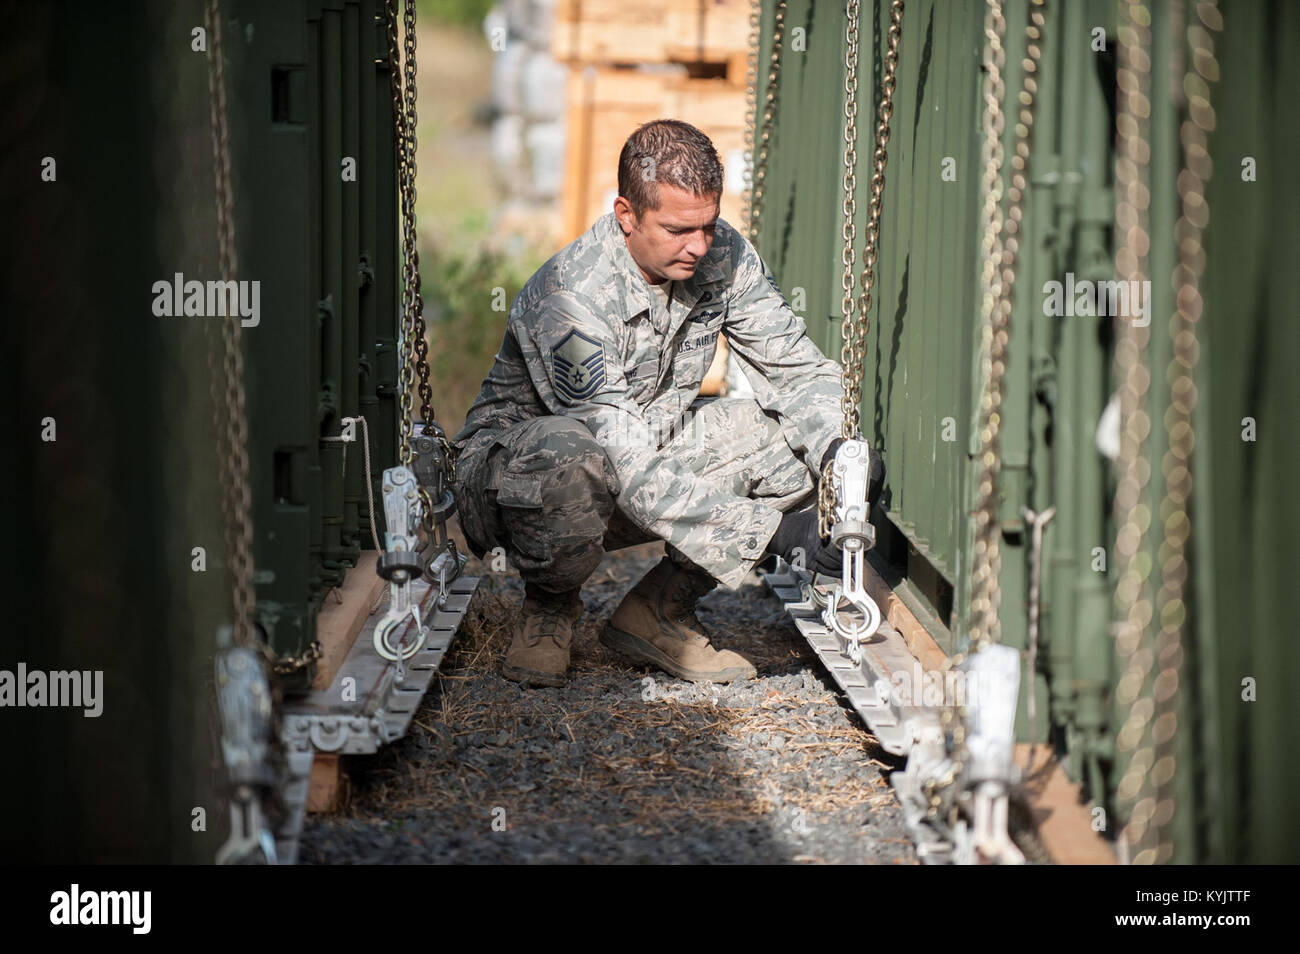 U.S. Air Force Master Sgt. Charles Wilding, an aerial porter from the Kentucky Air National Guard’s 123rd Contingency Response Group, tightens the chains on a pallet of cargo outside the Joint Operations Center at Léopold Sédar Senghor International Airport in Dakar, Senegal, Oct. 24, 2014. Wilding and more than 70 other Kentucky Air Guardsmen are operating an Aerial Port of Debarkation in Senegal to funnel humanitarian supplies and military support into West Africa as part of Operation United Assistance, the U.S. Agency for International Development-led, whole-of-government effort to contain  Stock Photo